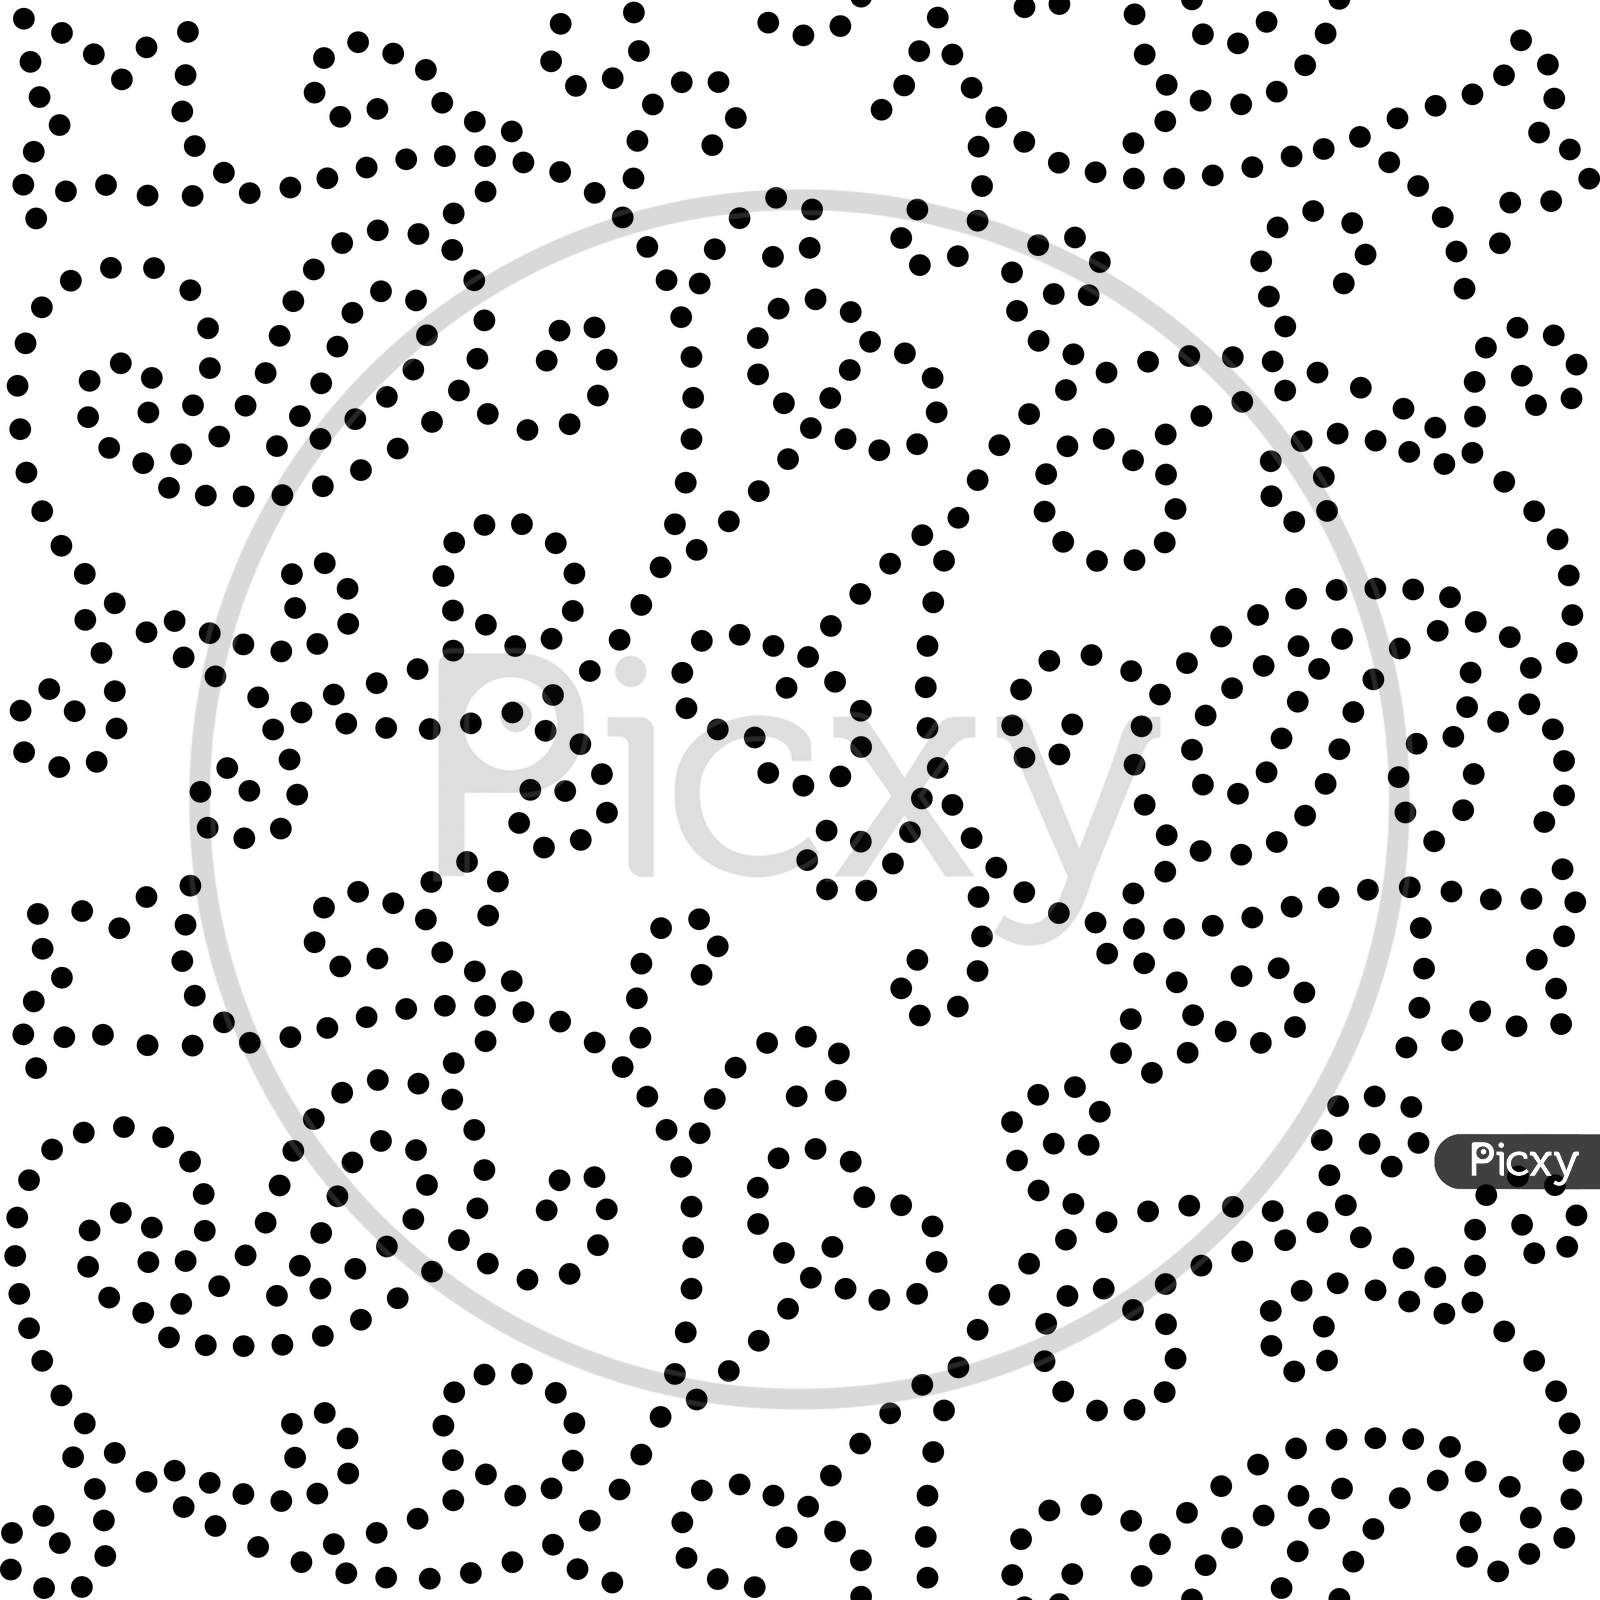 Black And White Abstract Chunri Dots Pattern Background Design.